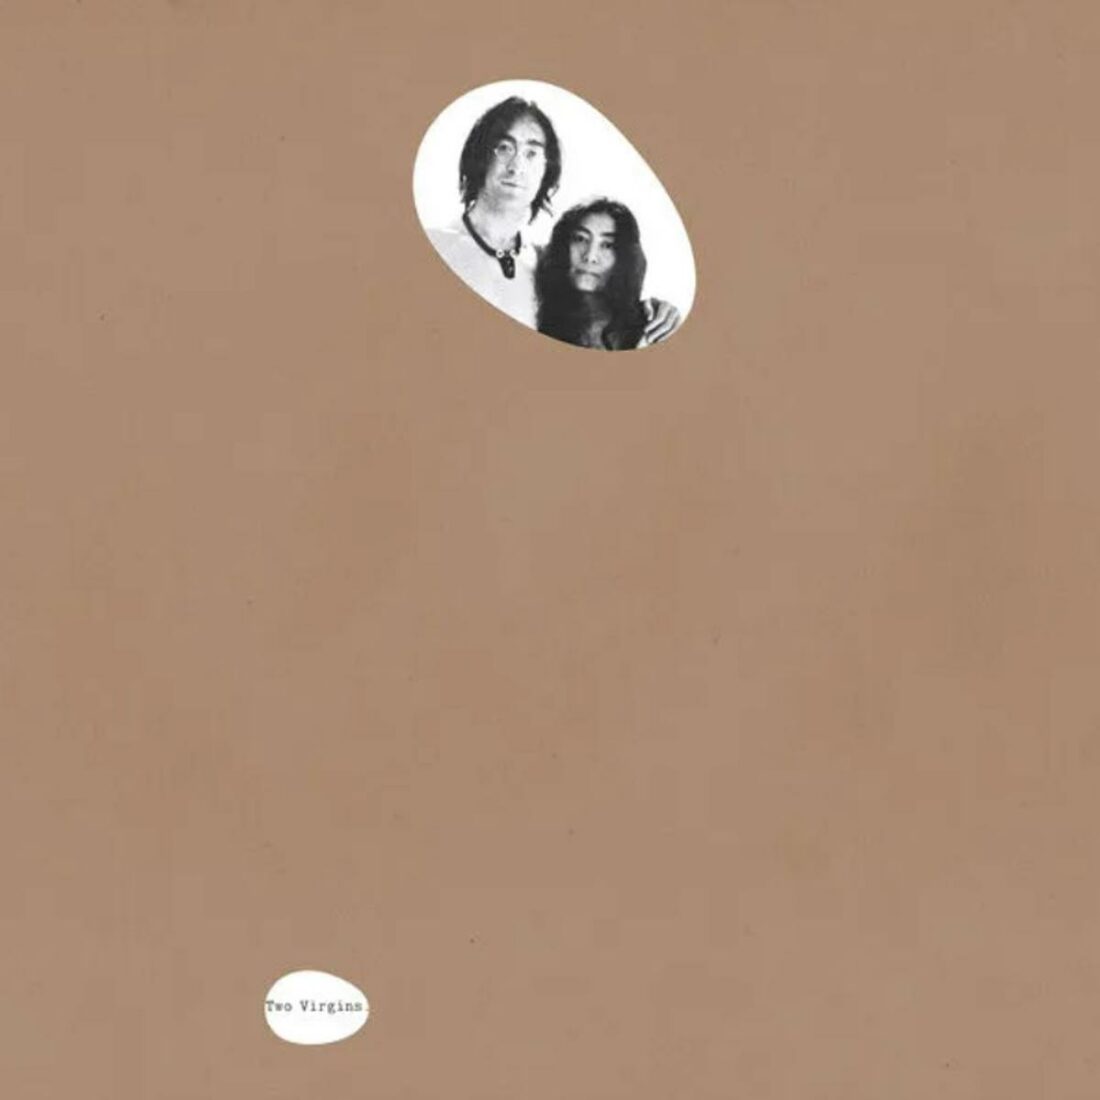 John Lennon and Yoko Ono, Unfinished Music No. 1: Two Virgins. (From: Amazon)